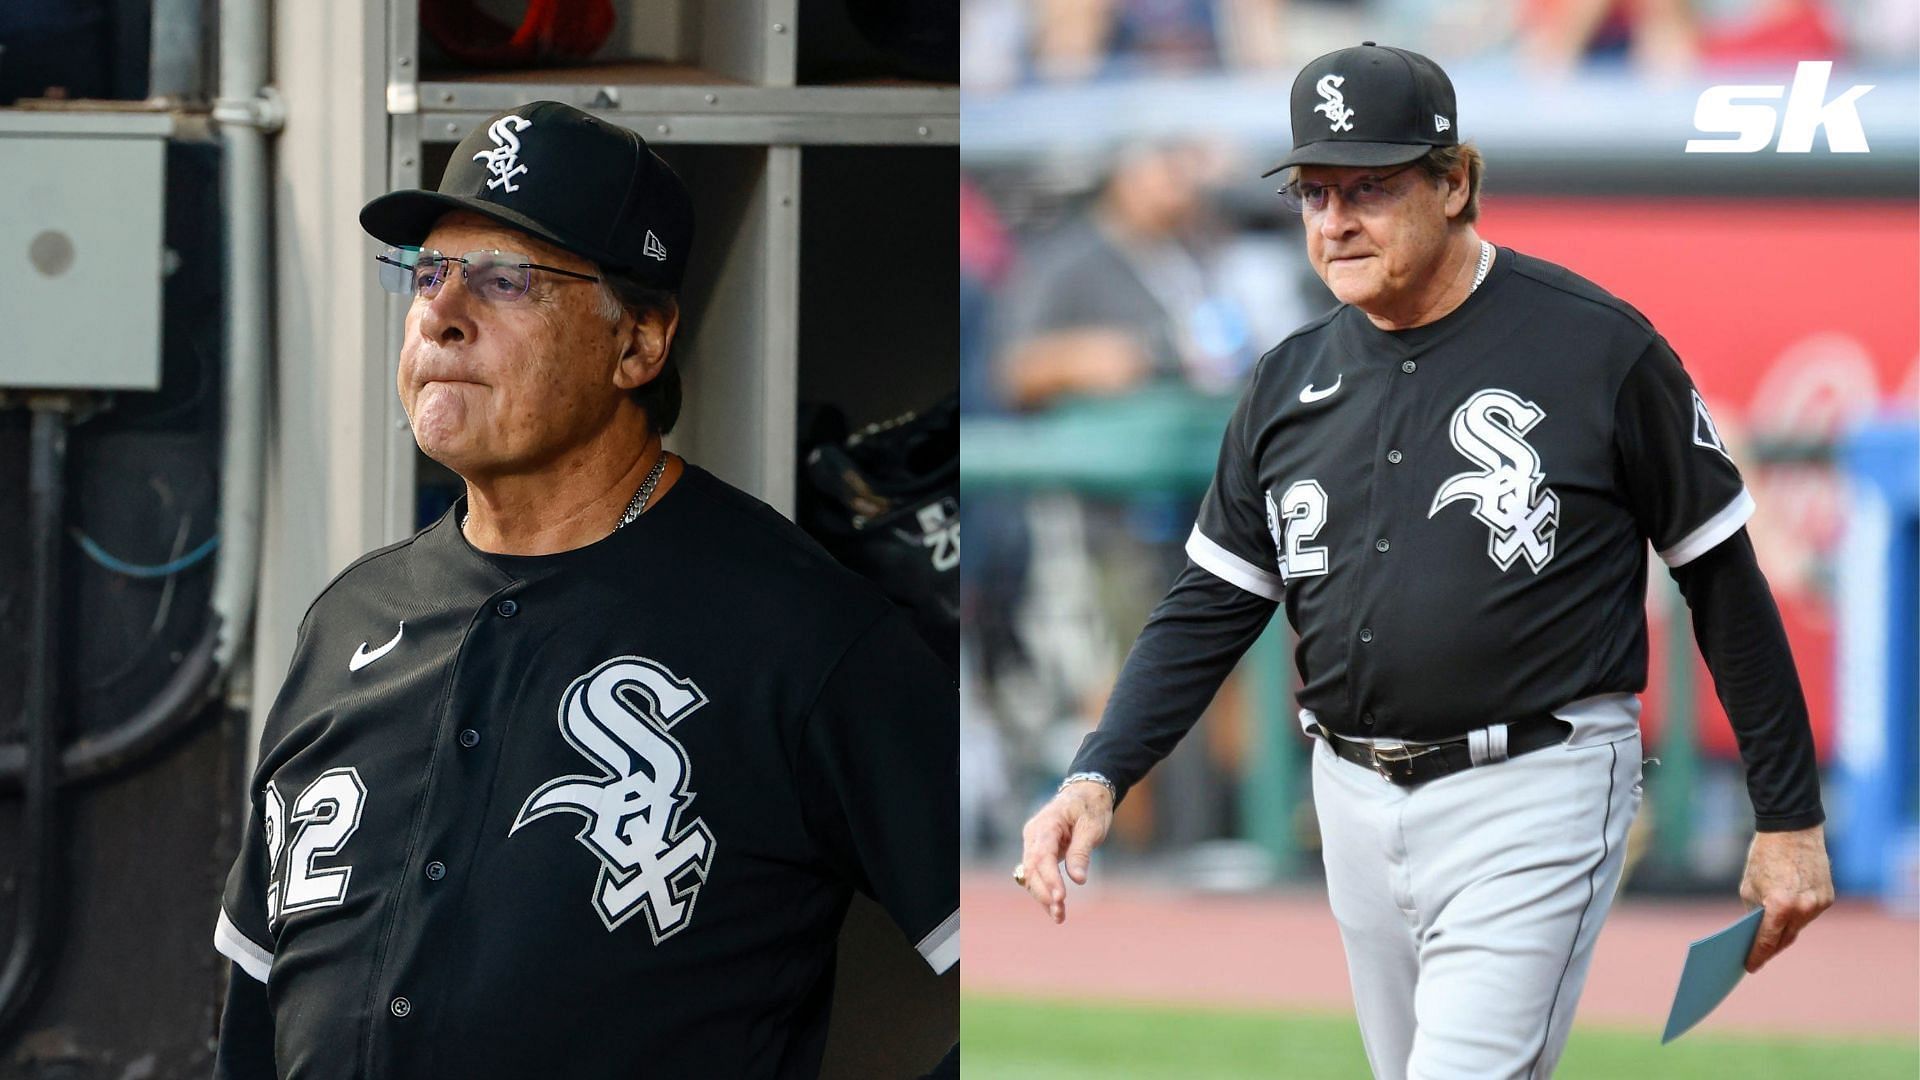 White Sox's Tony La Russa gets pacemaker; return date unknown